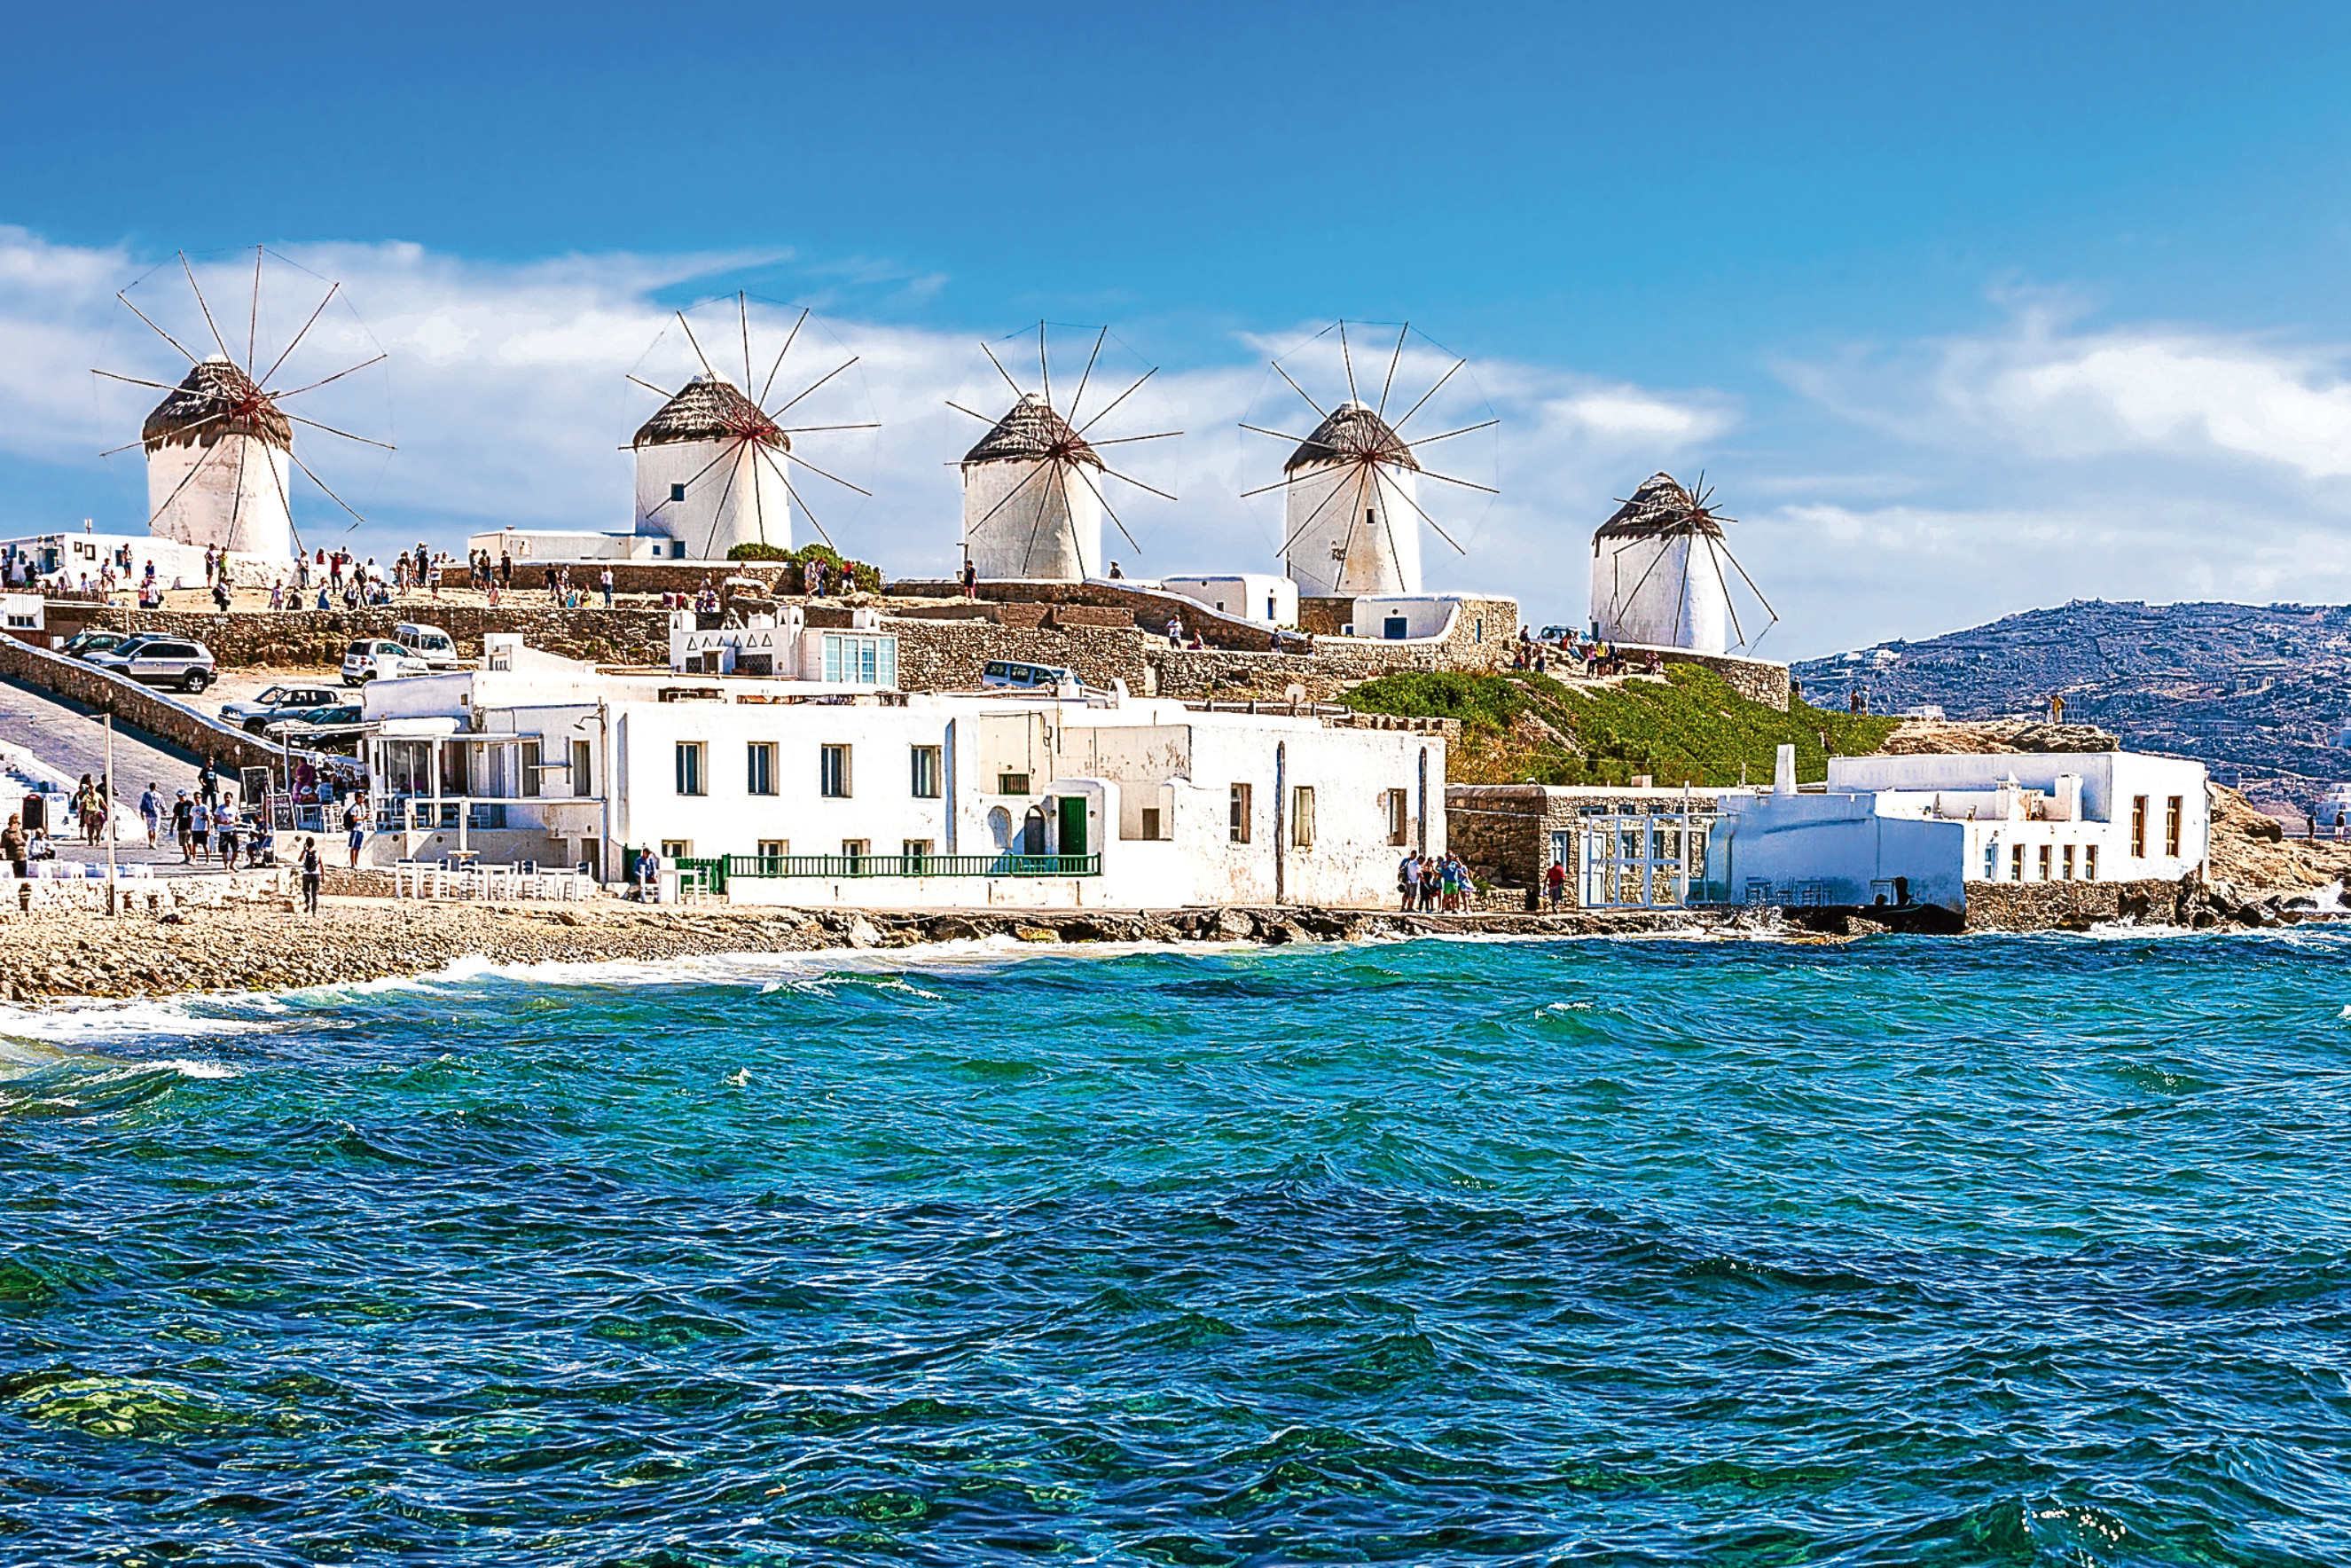 Two of the famous windmills in Mykonos, Greece (iStock)